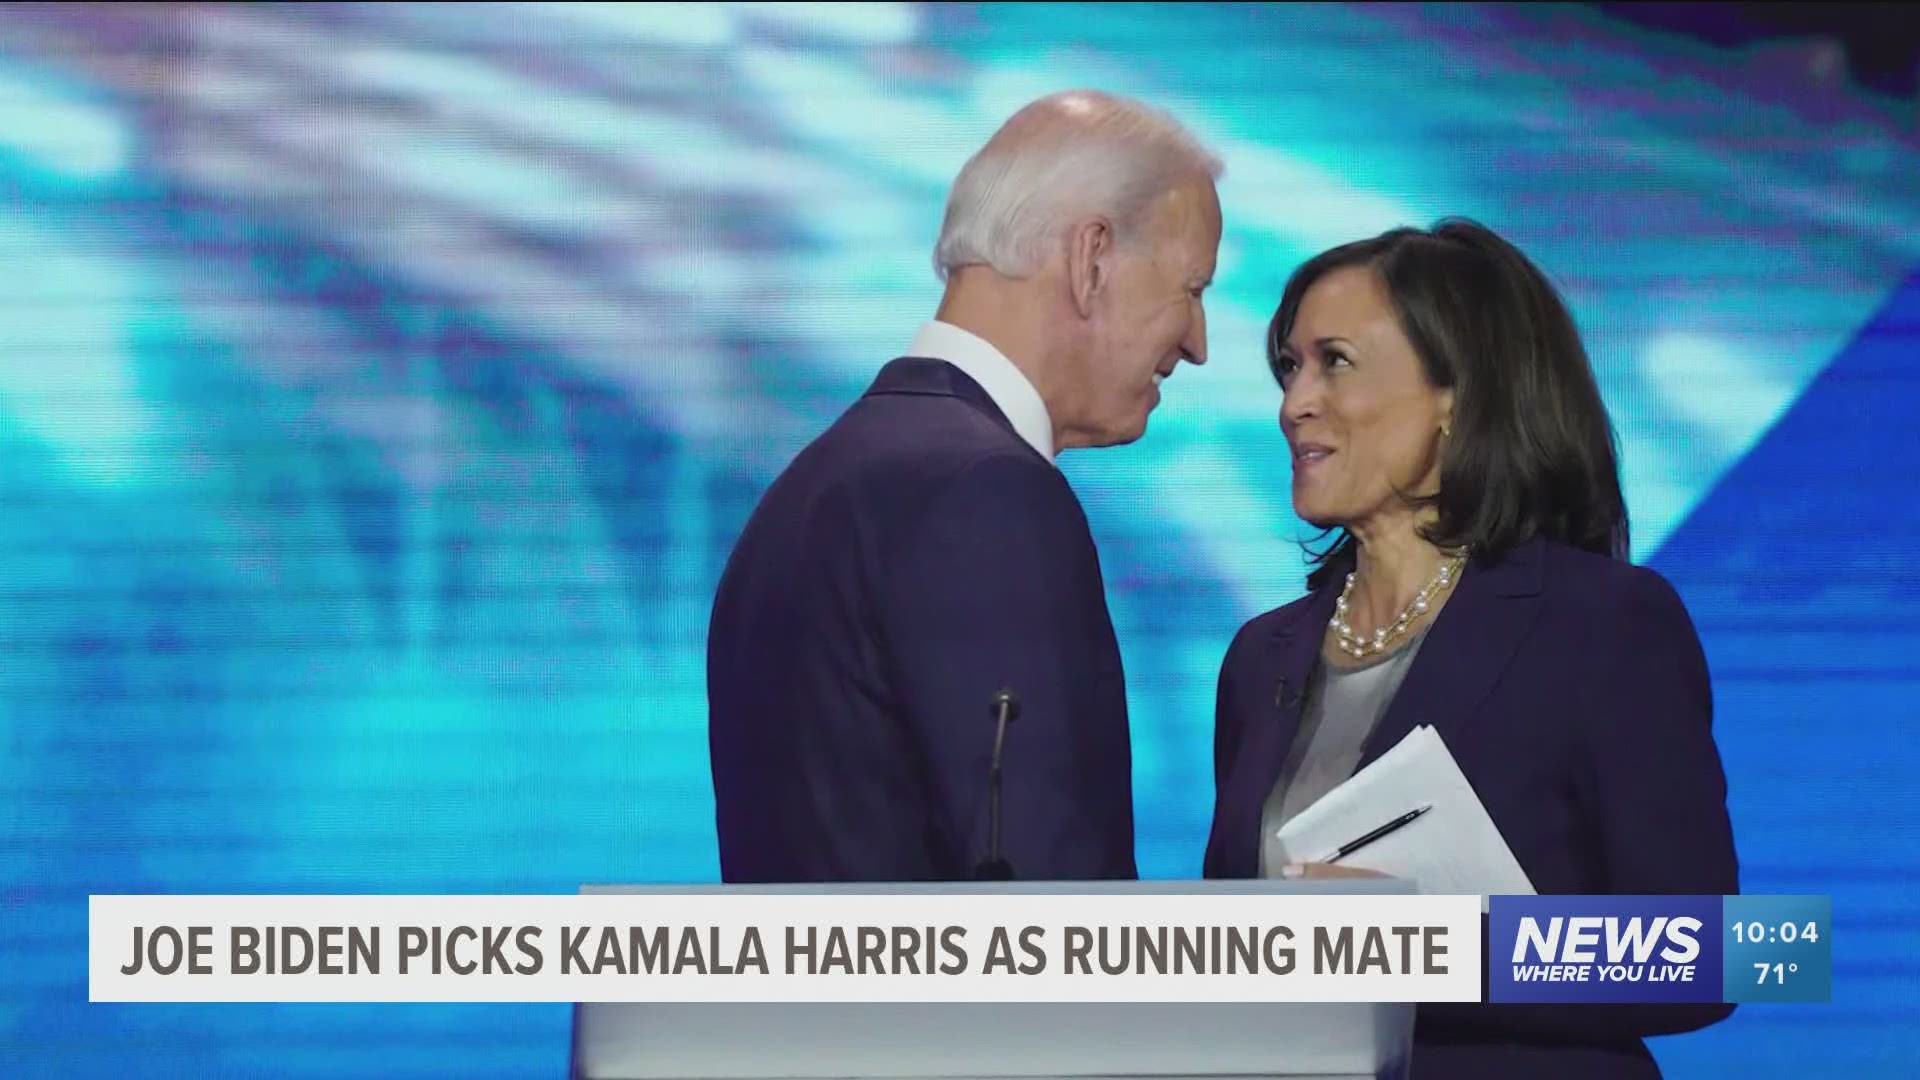 Harris was sworn in as a Senator in 2017 and she was the second African-American woman and first South Asian-American senator in history.